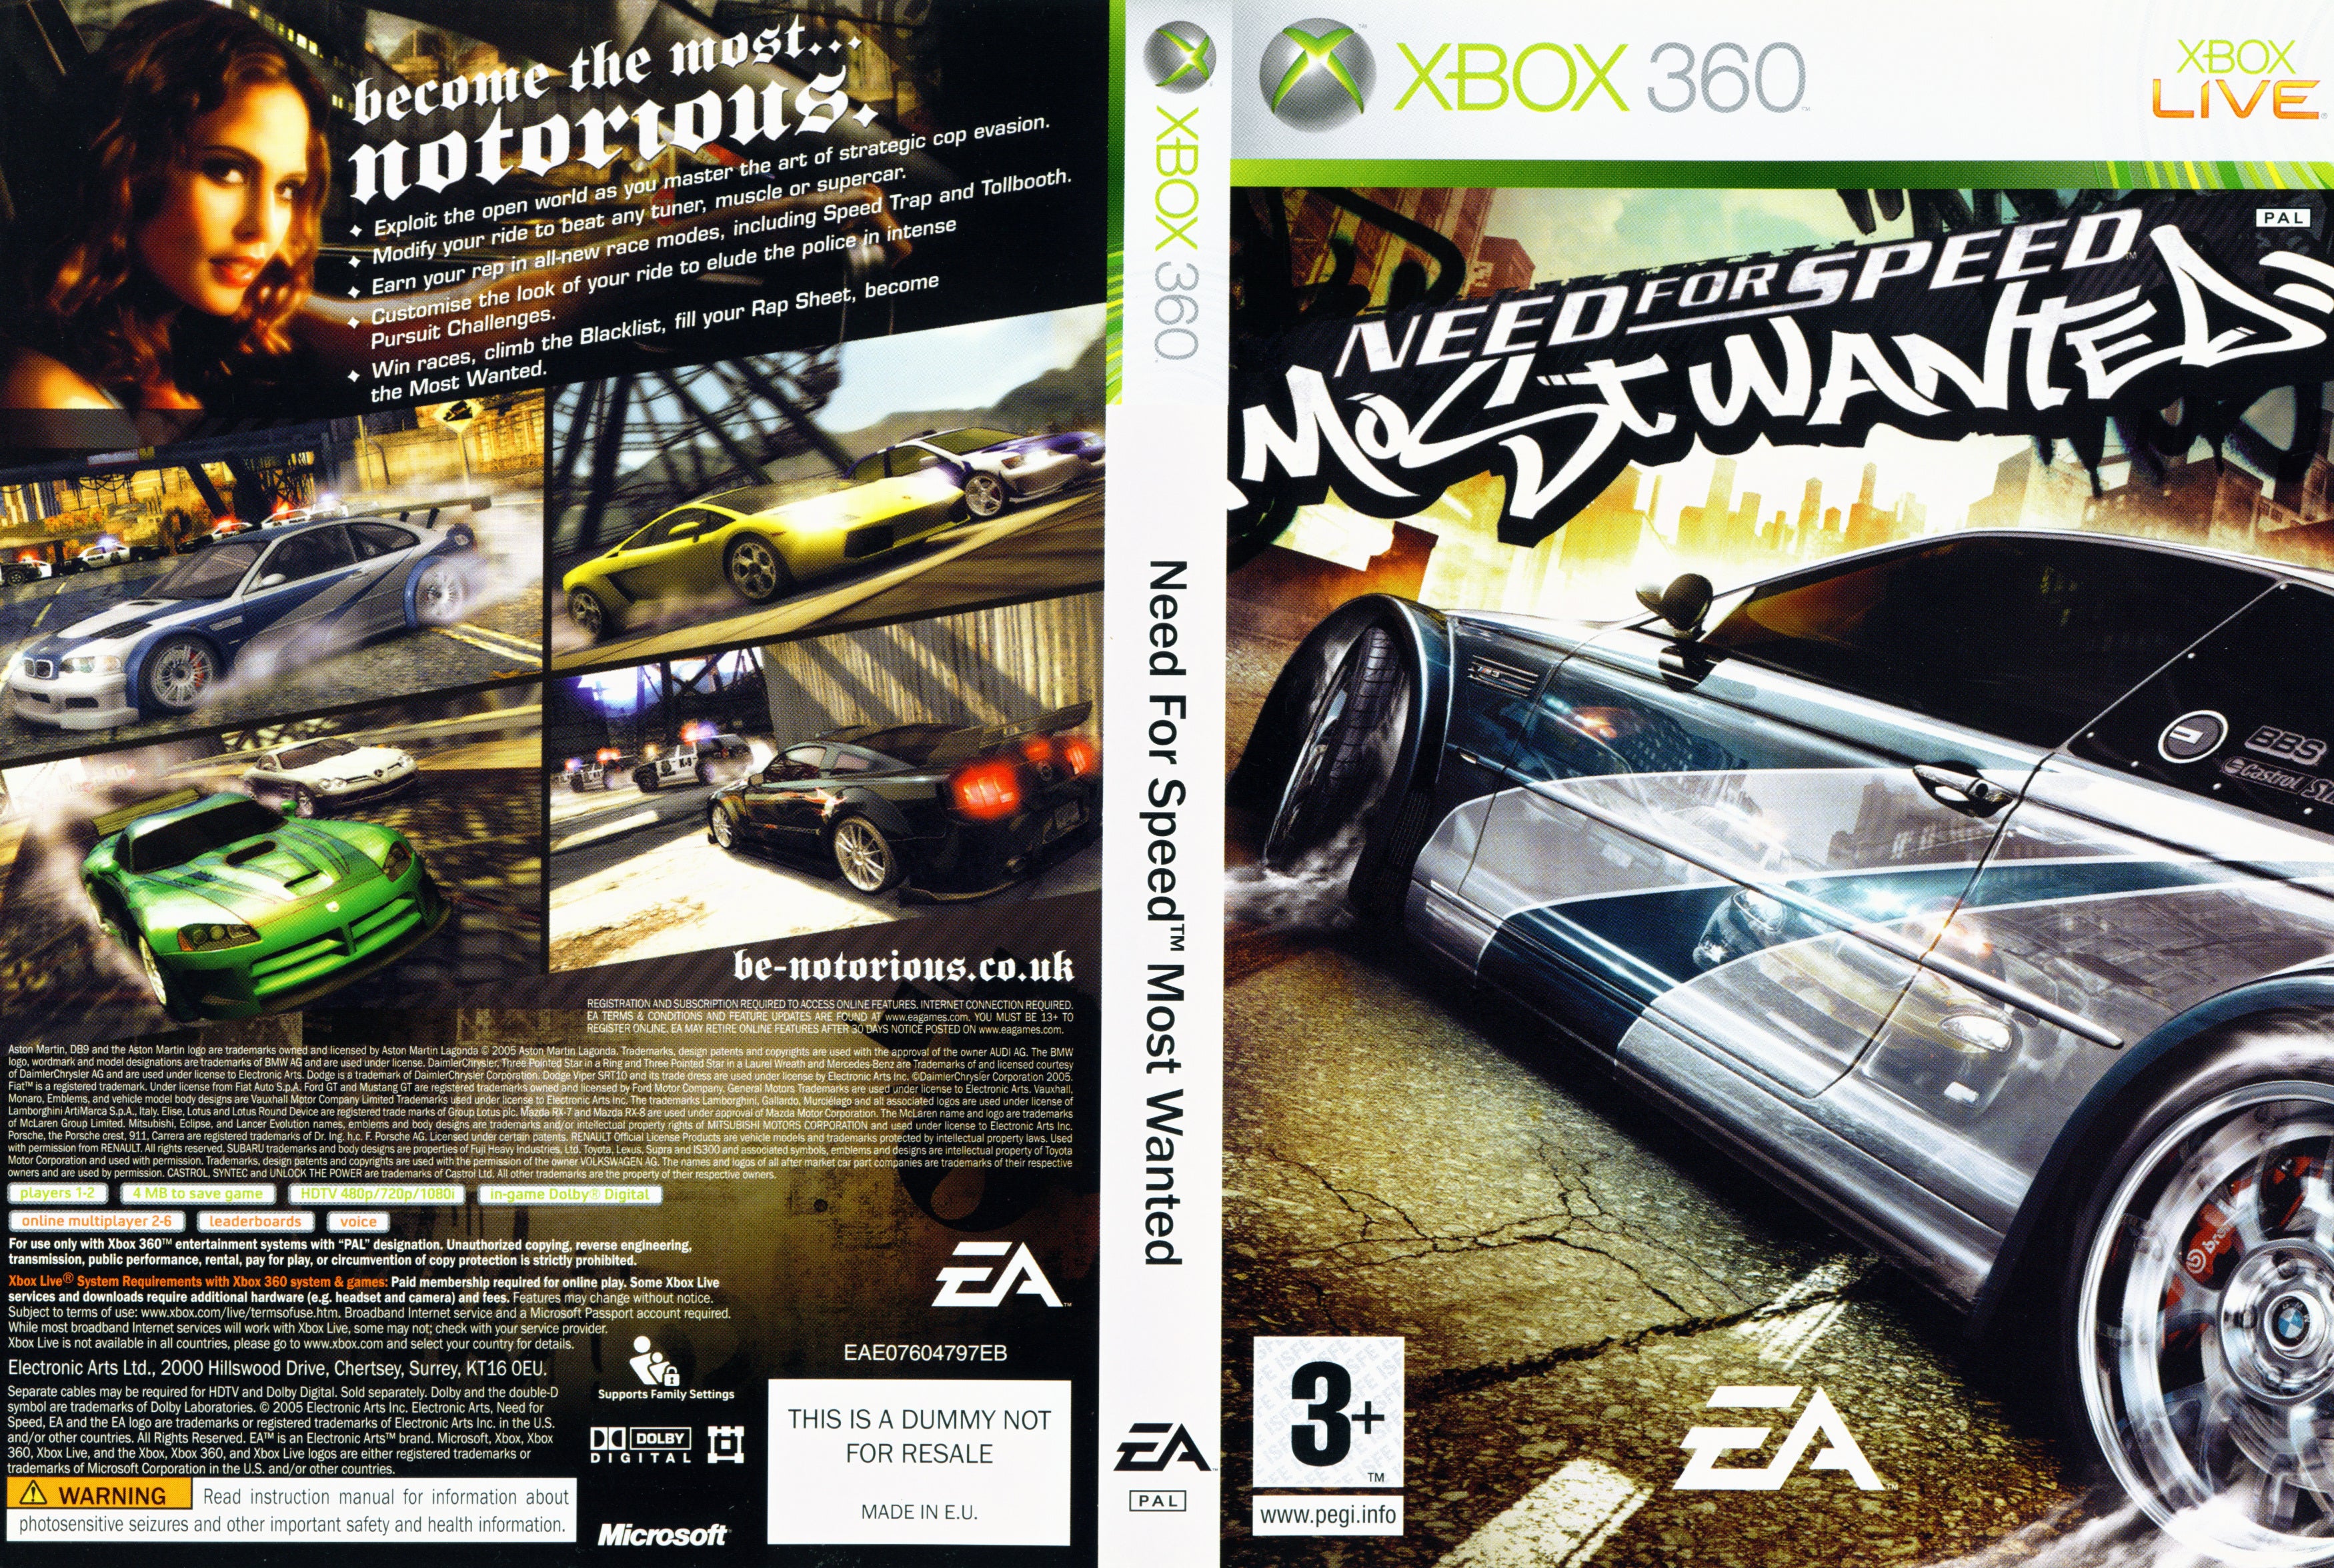 update to play need for speed most wanted on xbox 360